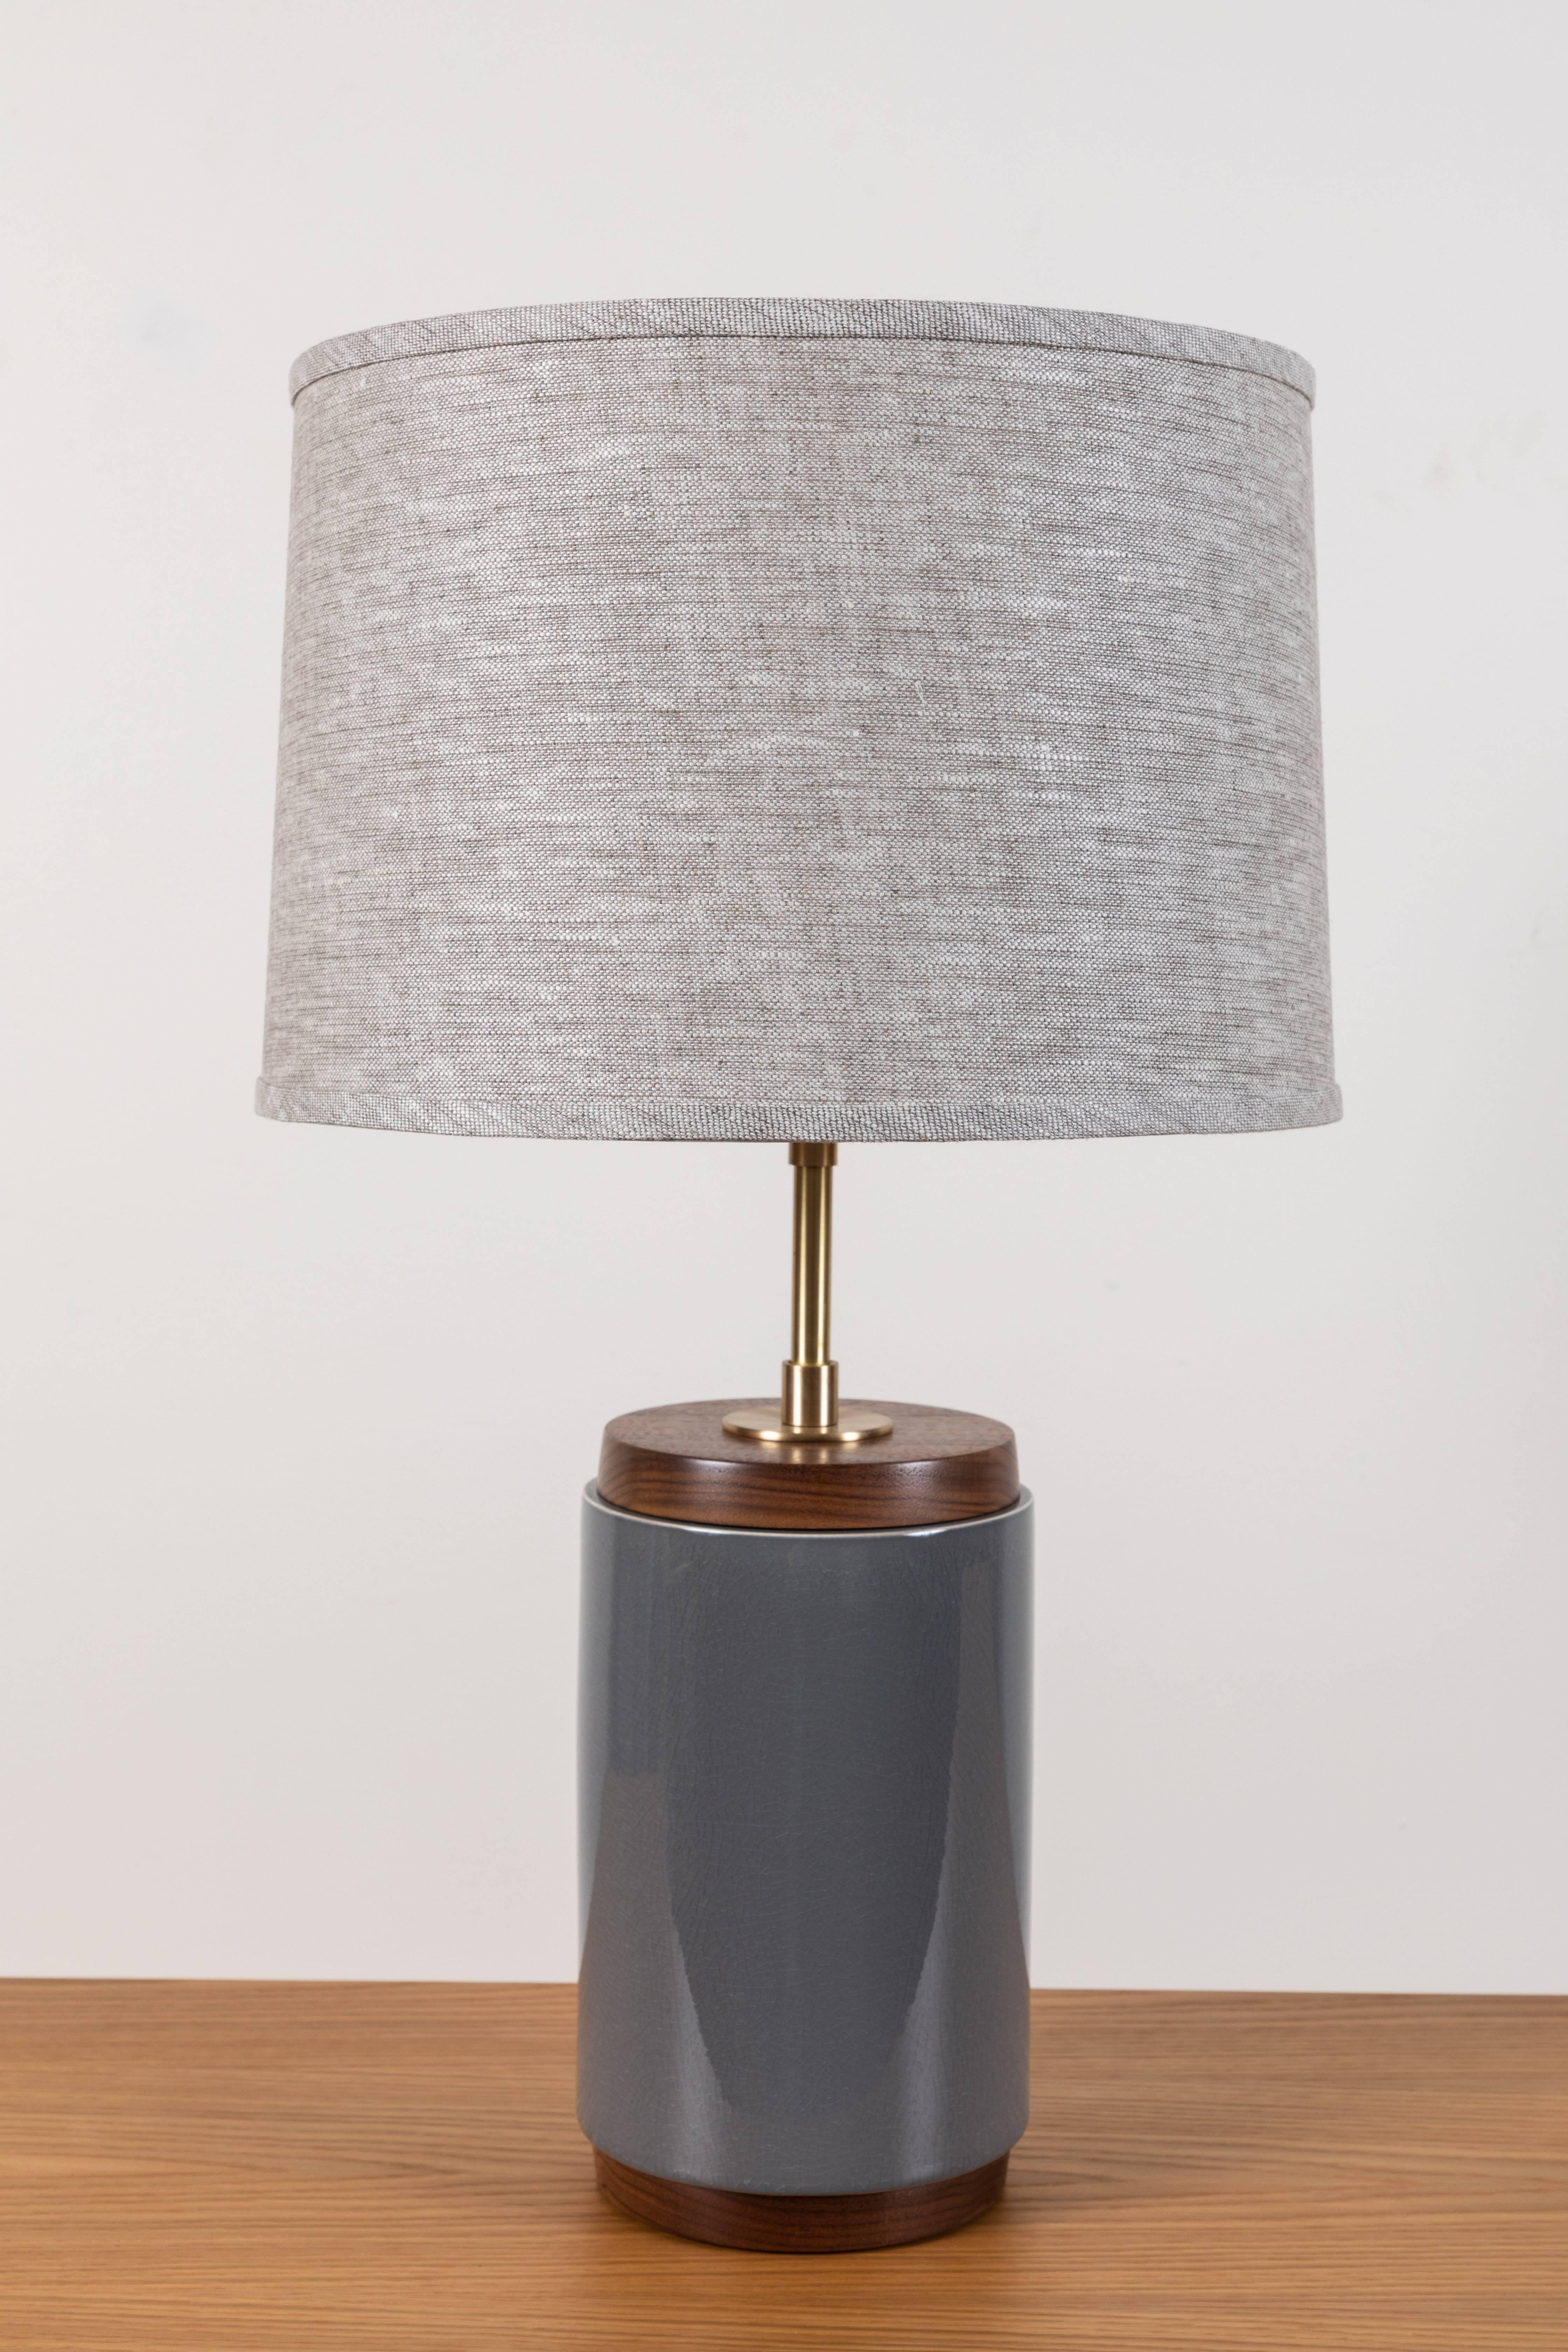 Mid-Century Modern Pair of Porter Lamps by Stone and Sawyer for Lawson-Fenning